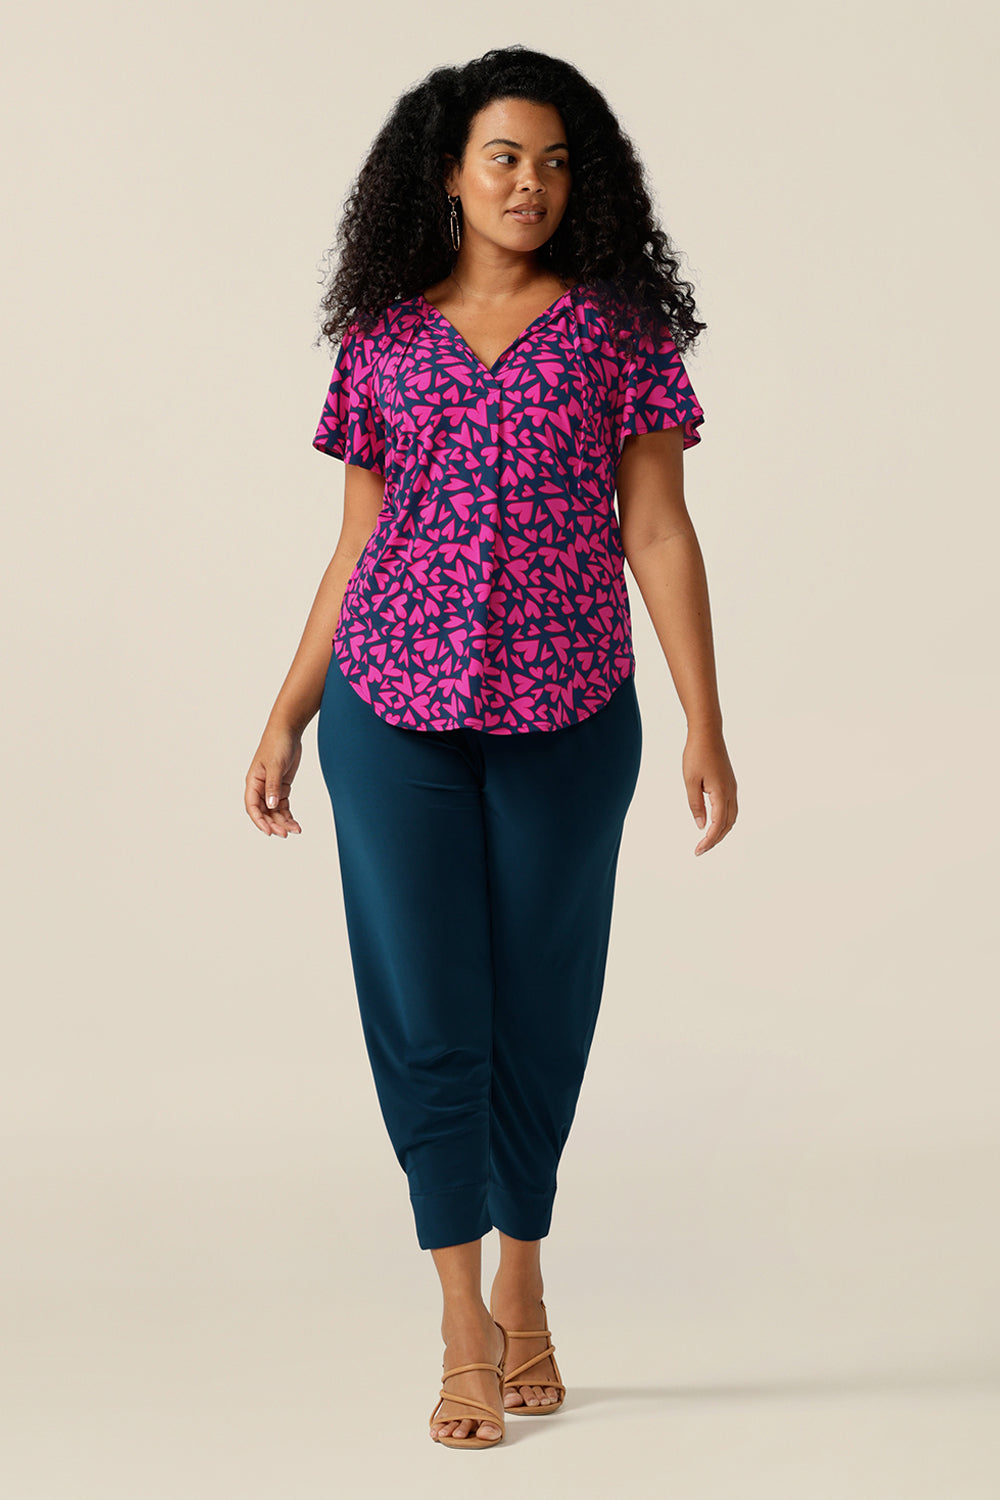 A size 12 curvy woman wears a V-neck short sleeve jersey top printed with pink hearts. She wears the top with cropped pants in blue jersey. Both are designed and made in Australia for petite to plus size women.